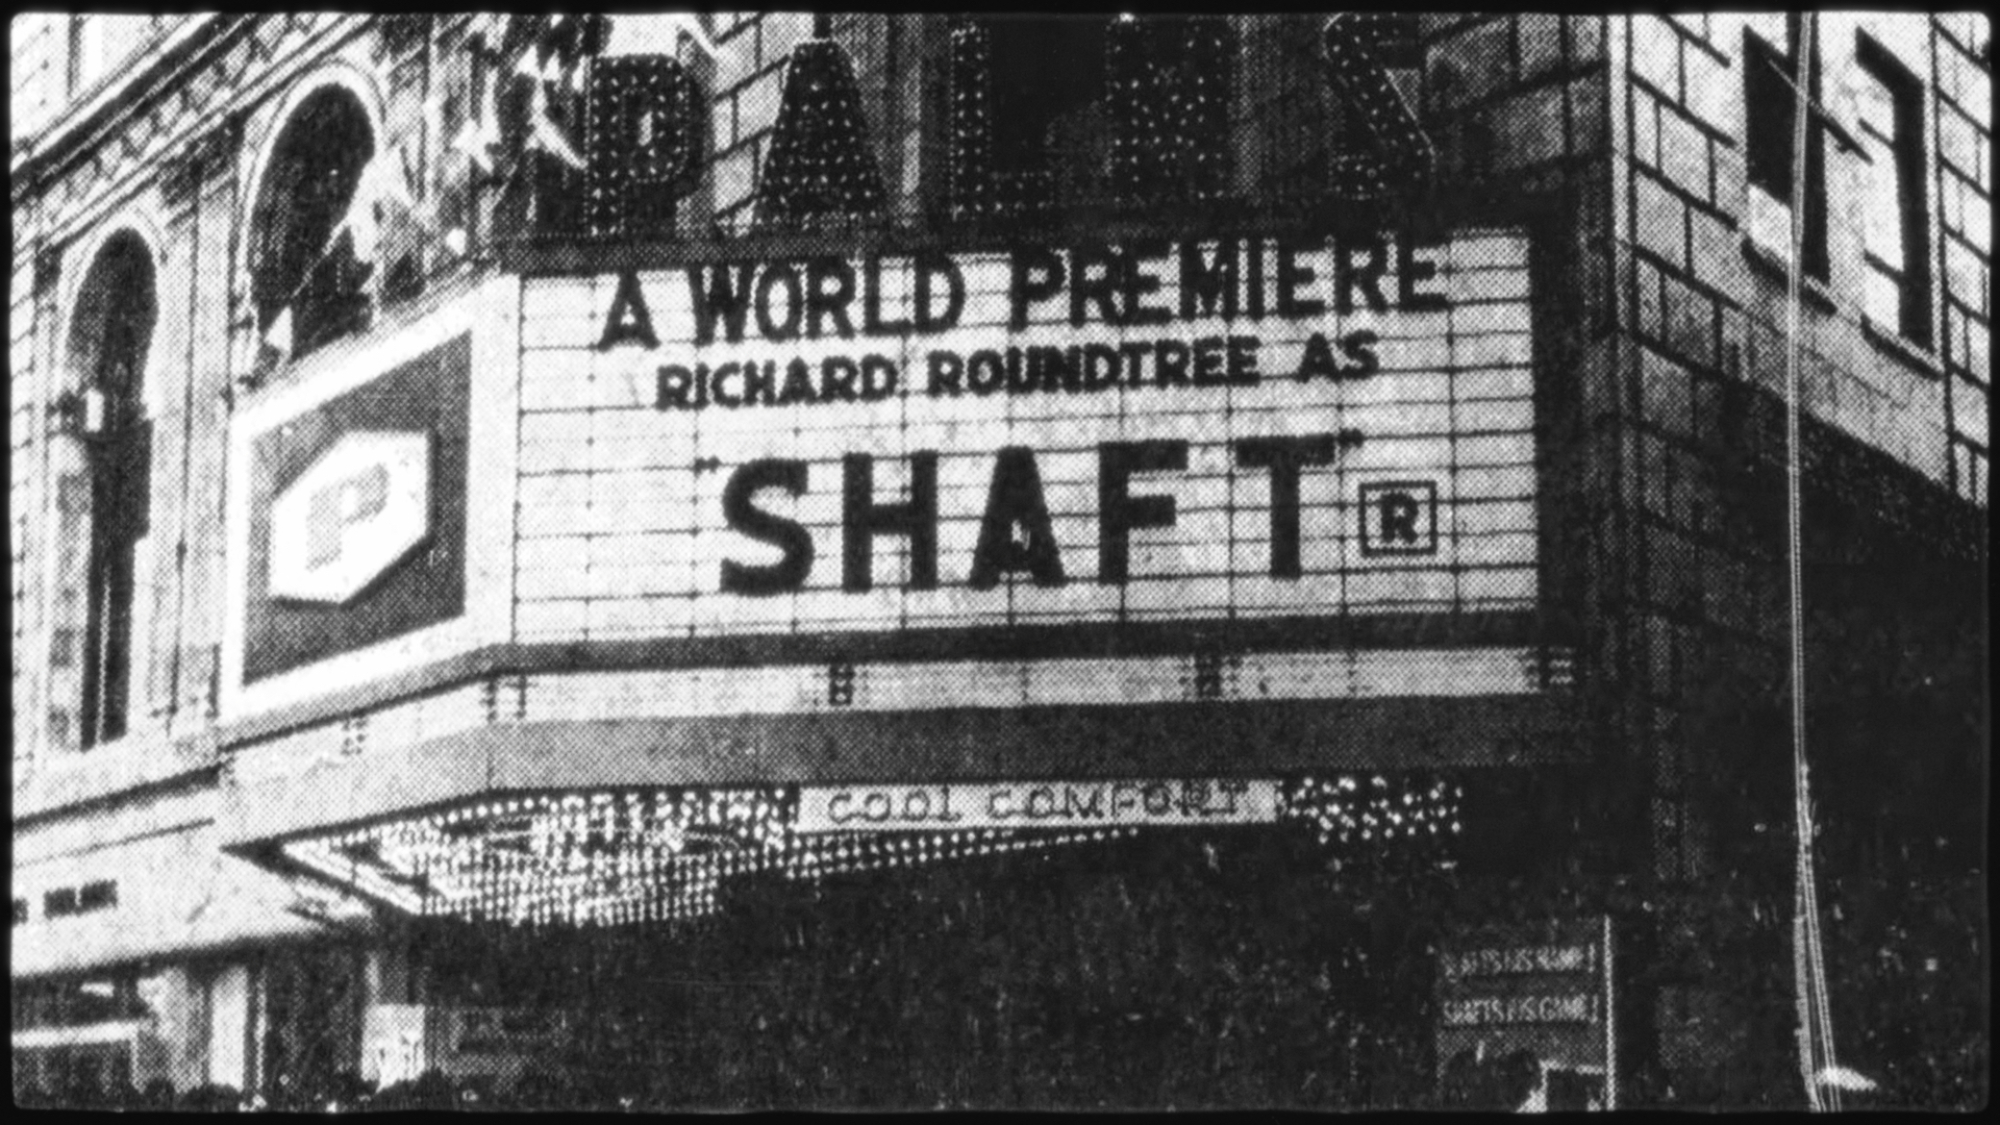 A black and white photo of a cinema showing the world premiere of "Shaft"